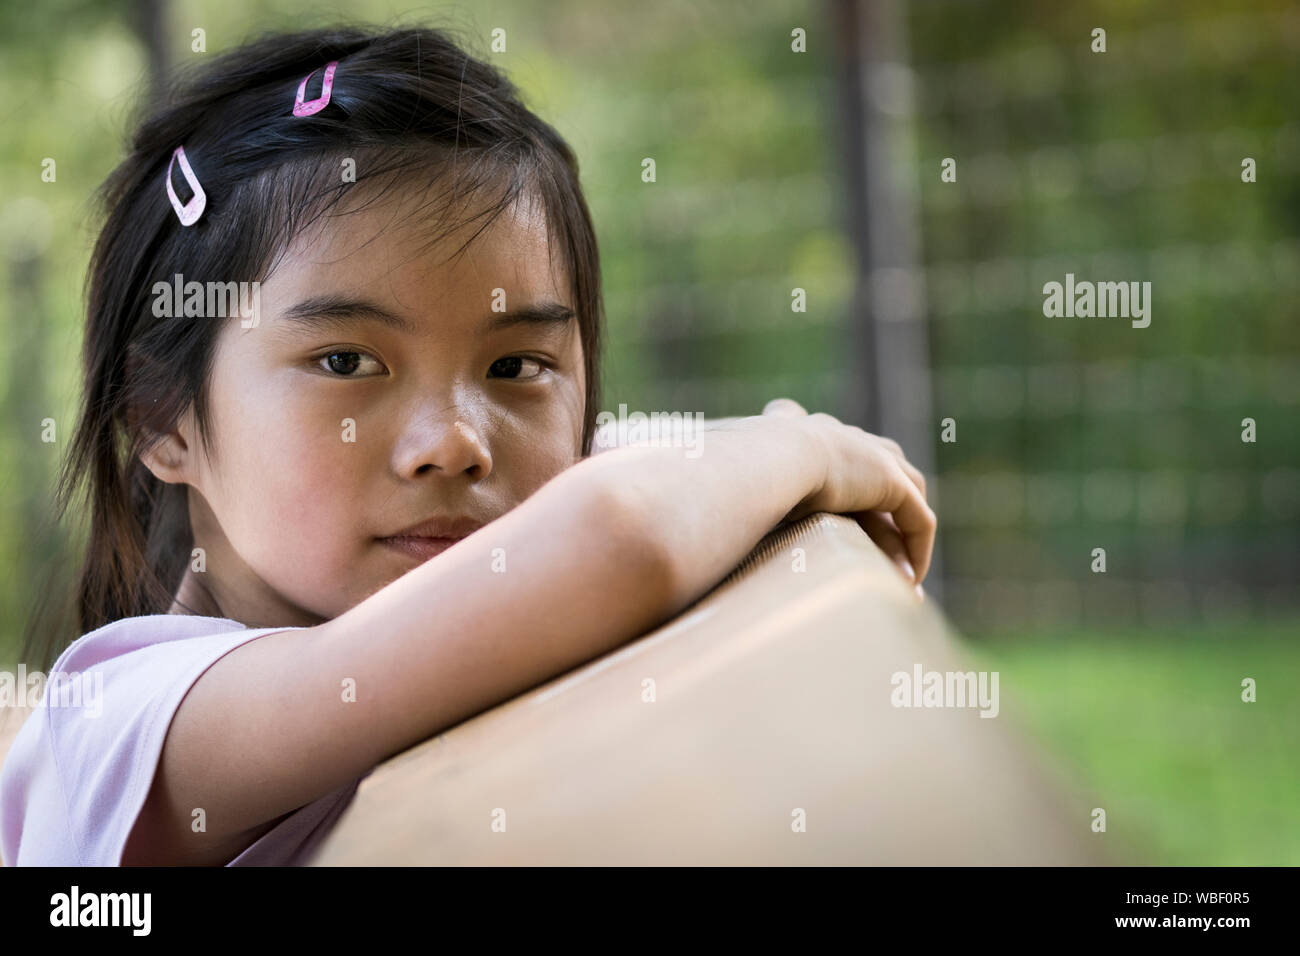 Little Asian girl looking at camera Stock Photo